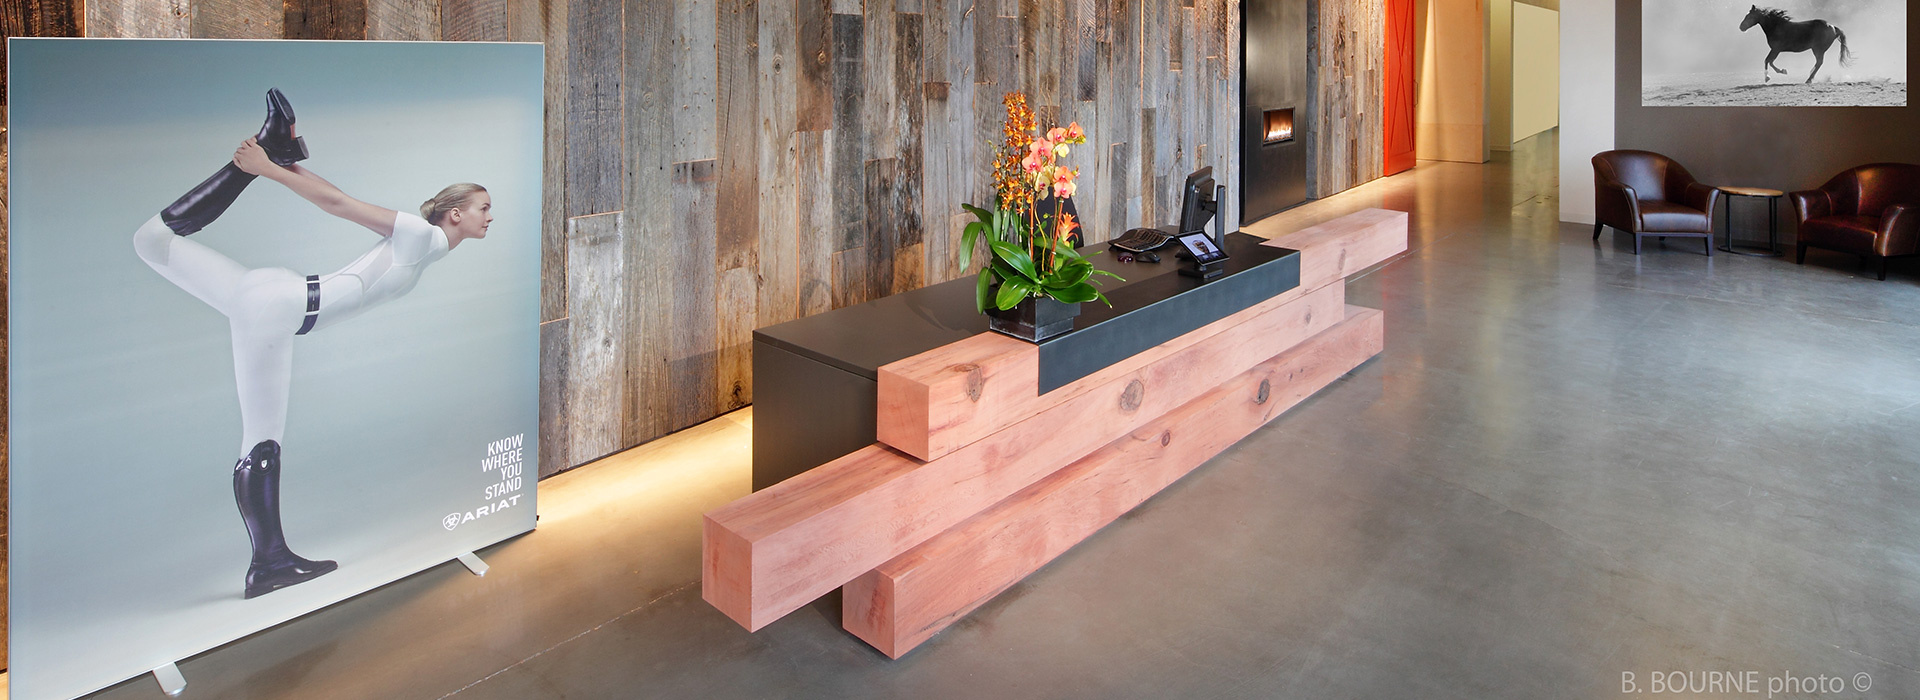 Ariat HQ Reception Desk Made of Redwood Timbers